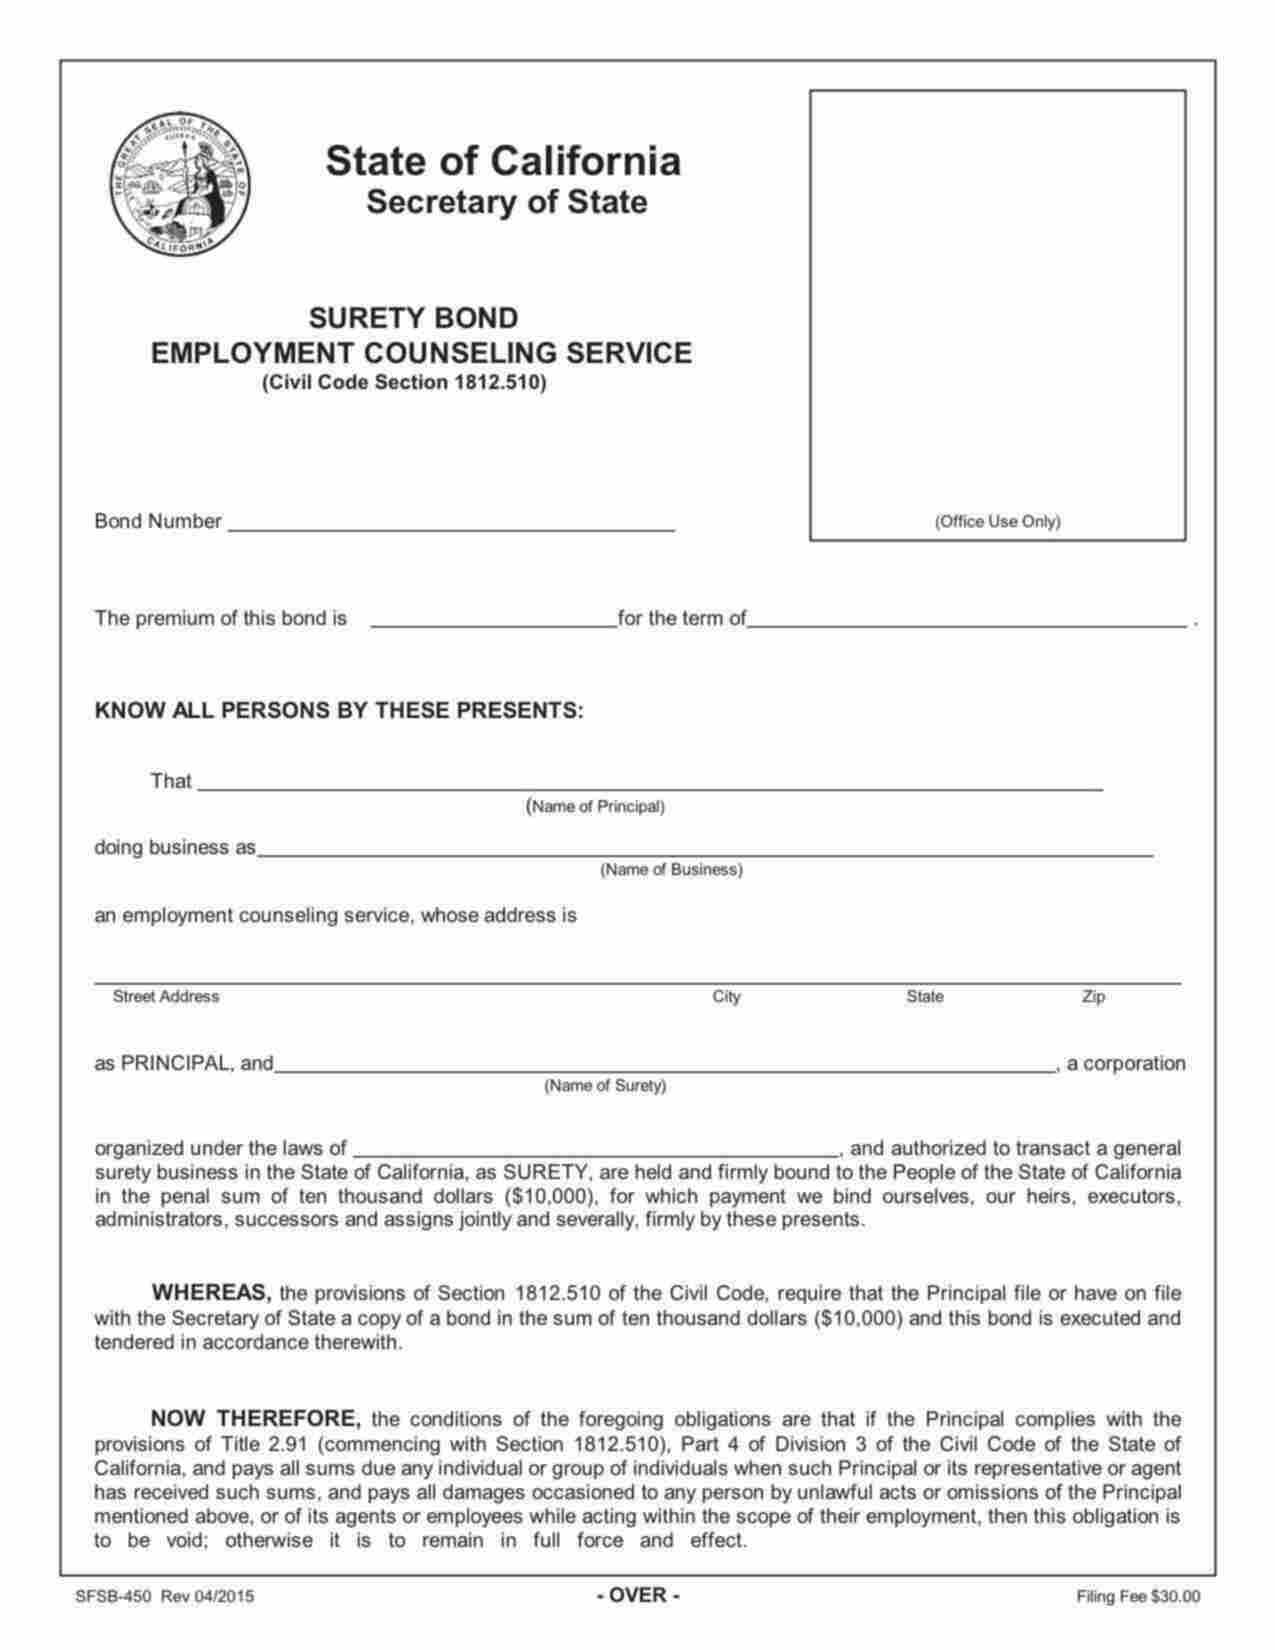 California Employment Counseling Service Bond Form